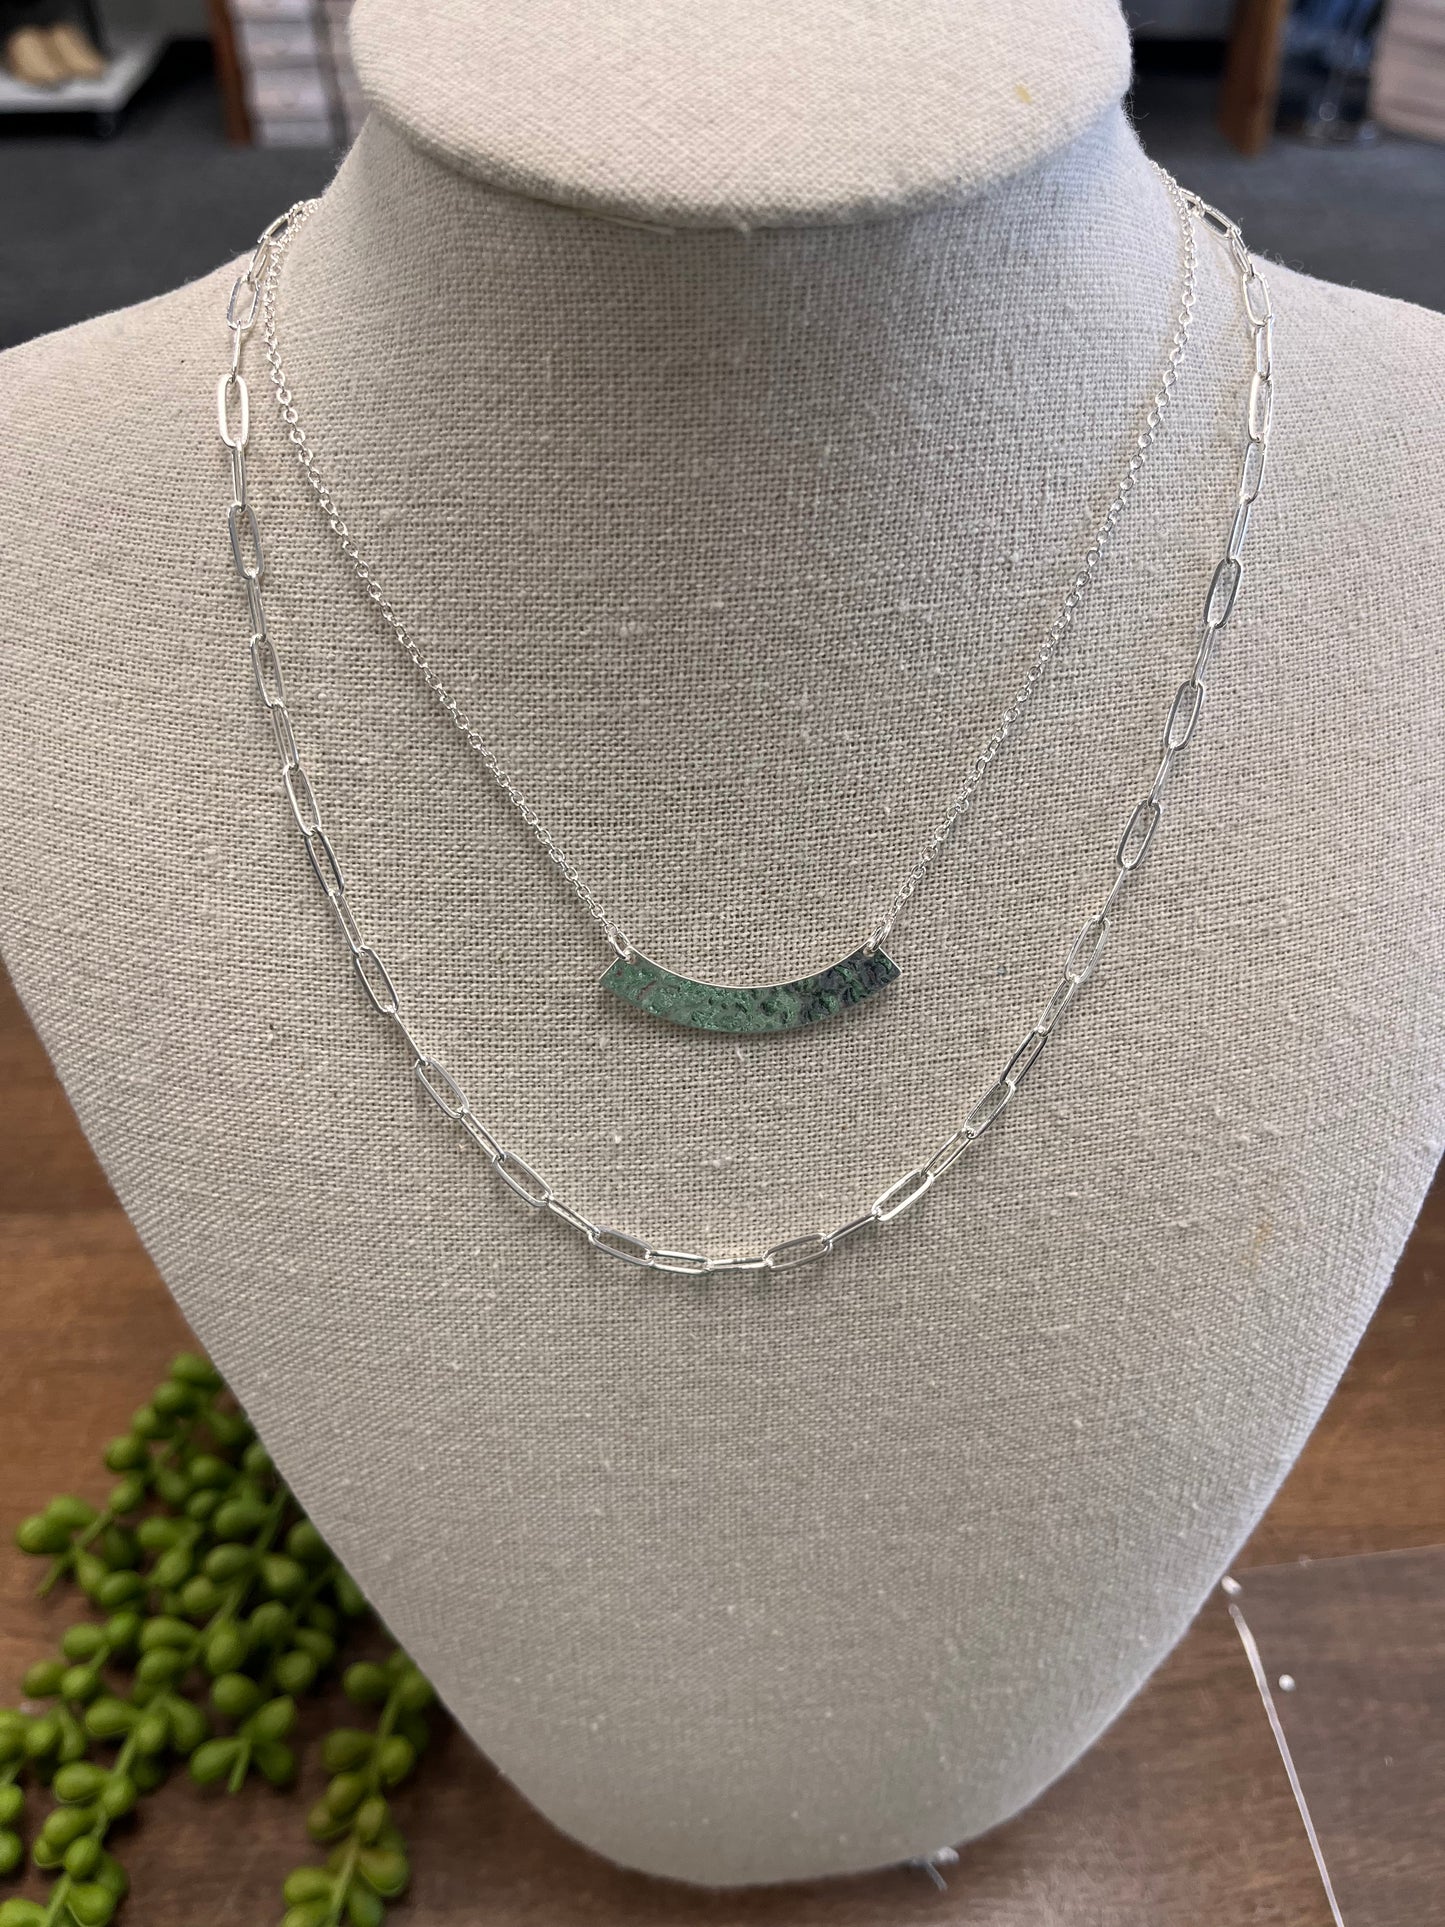 Silver curved bar necklace